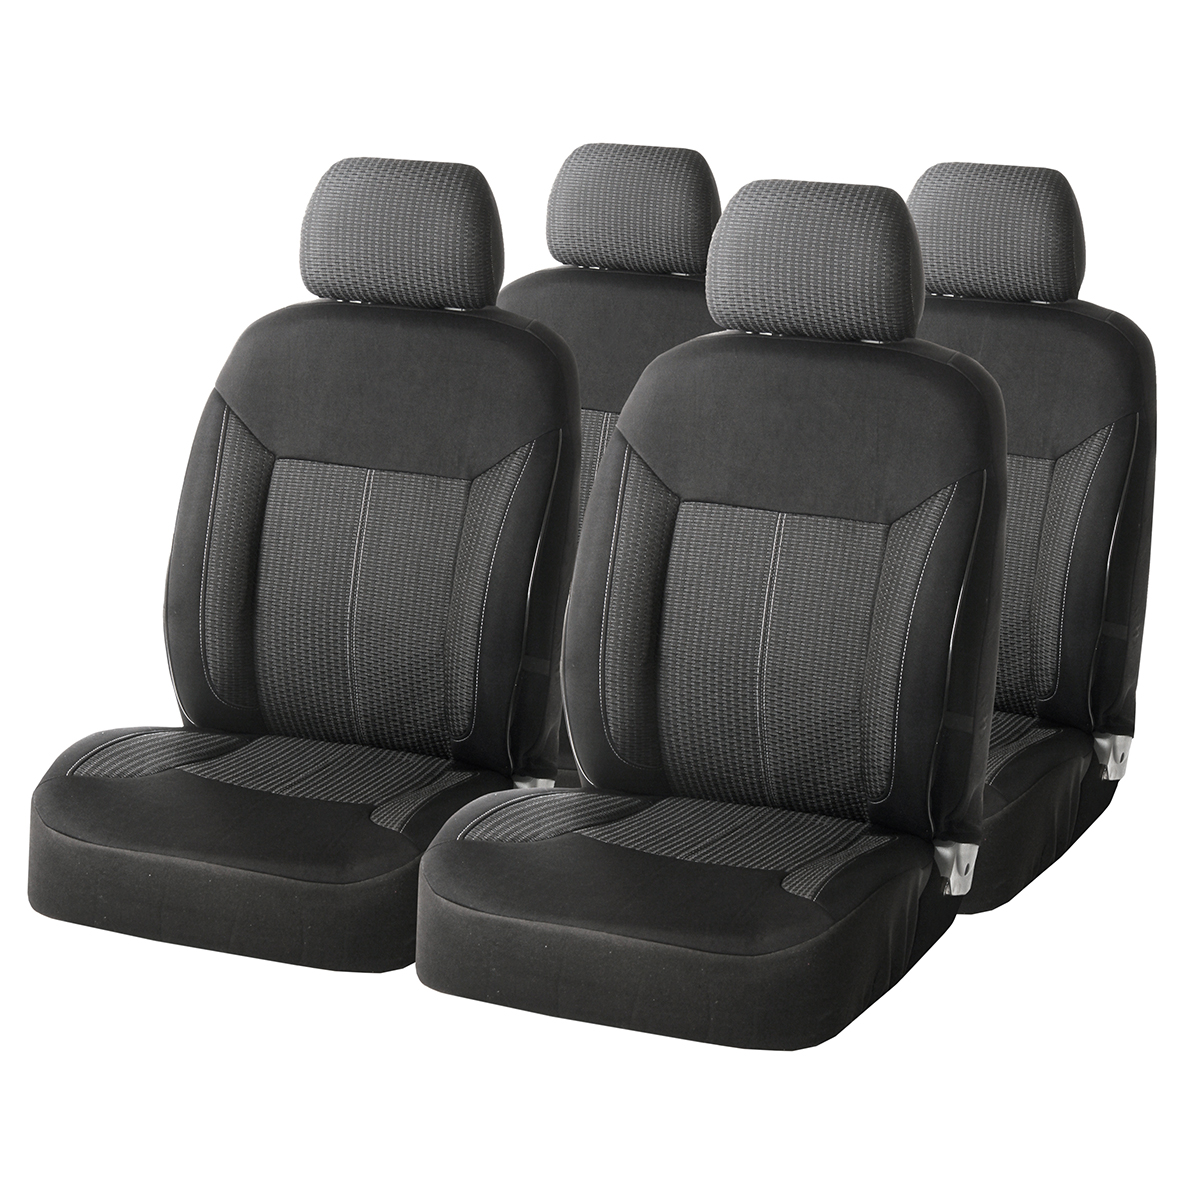 fathers-day-gift-guide/images/Seat-covers-partsavatar-canada.jpeg